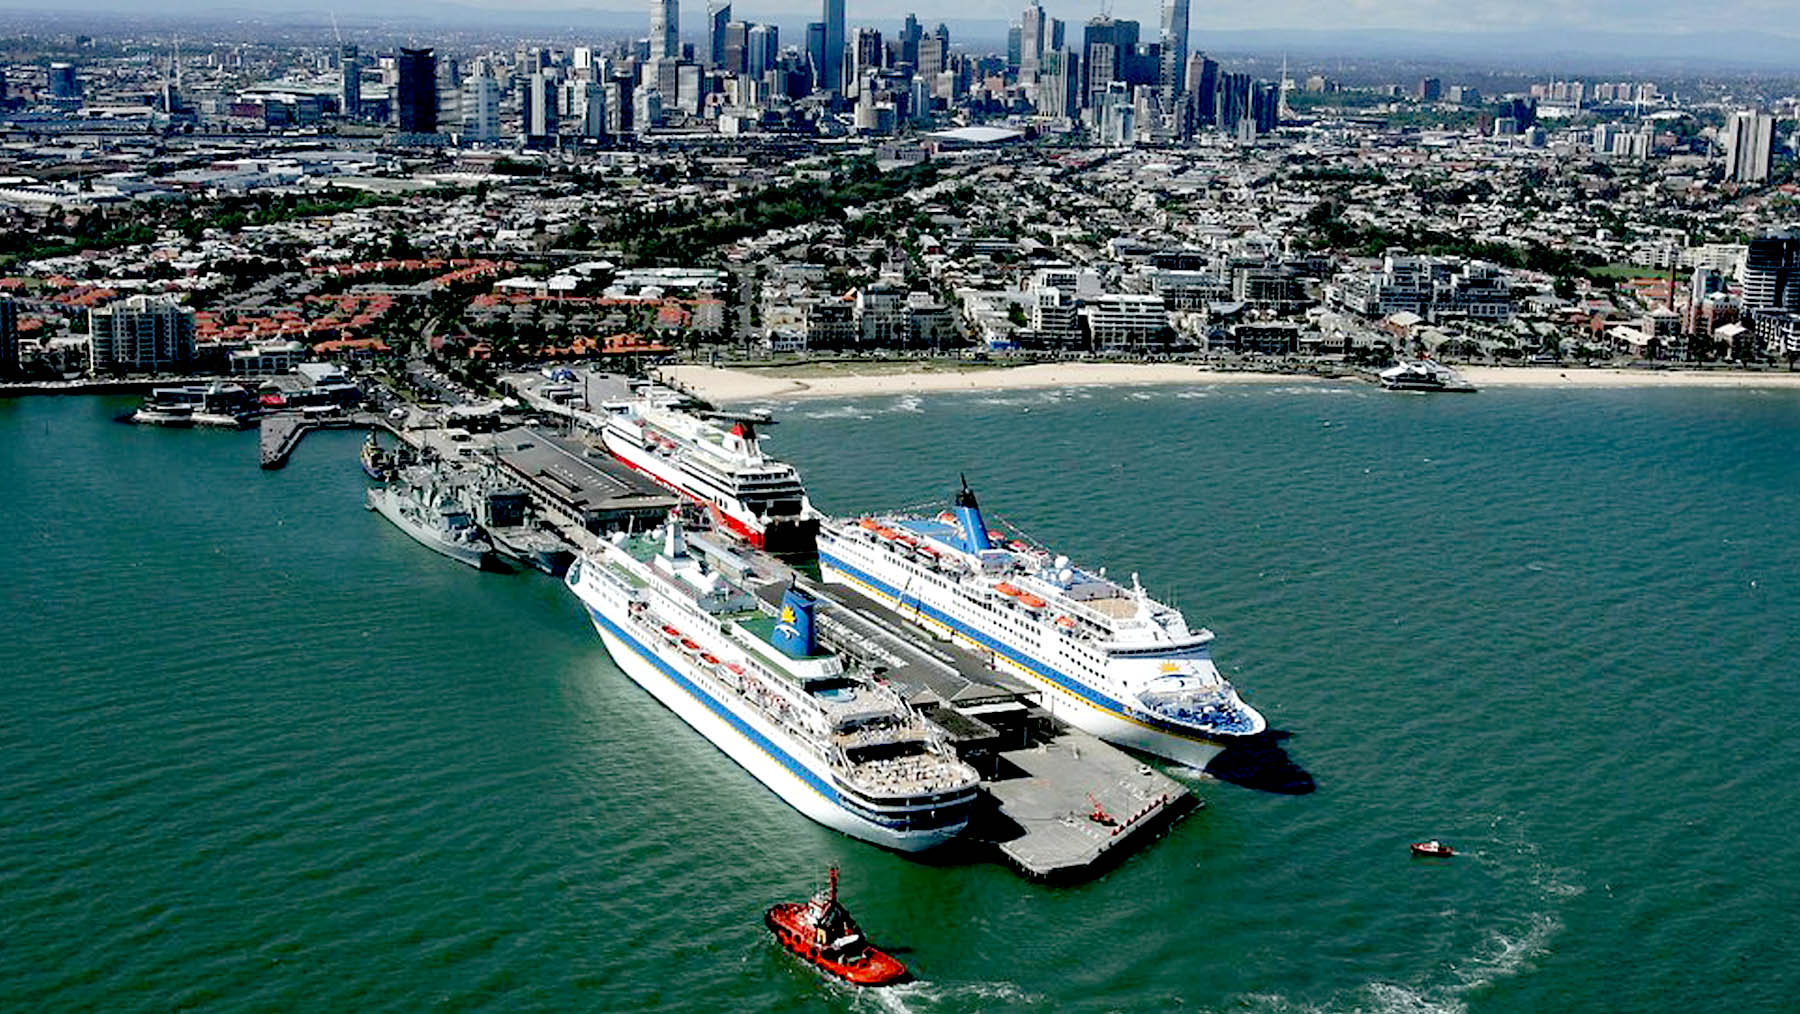 Station Pier is the point of departure of the Best Christmas cruises from Melbourne.